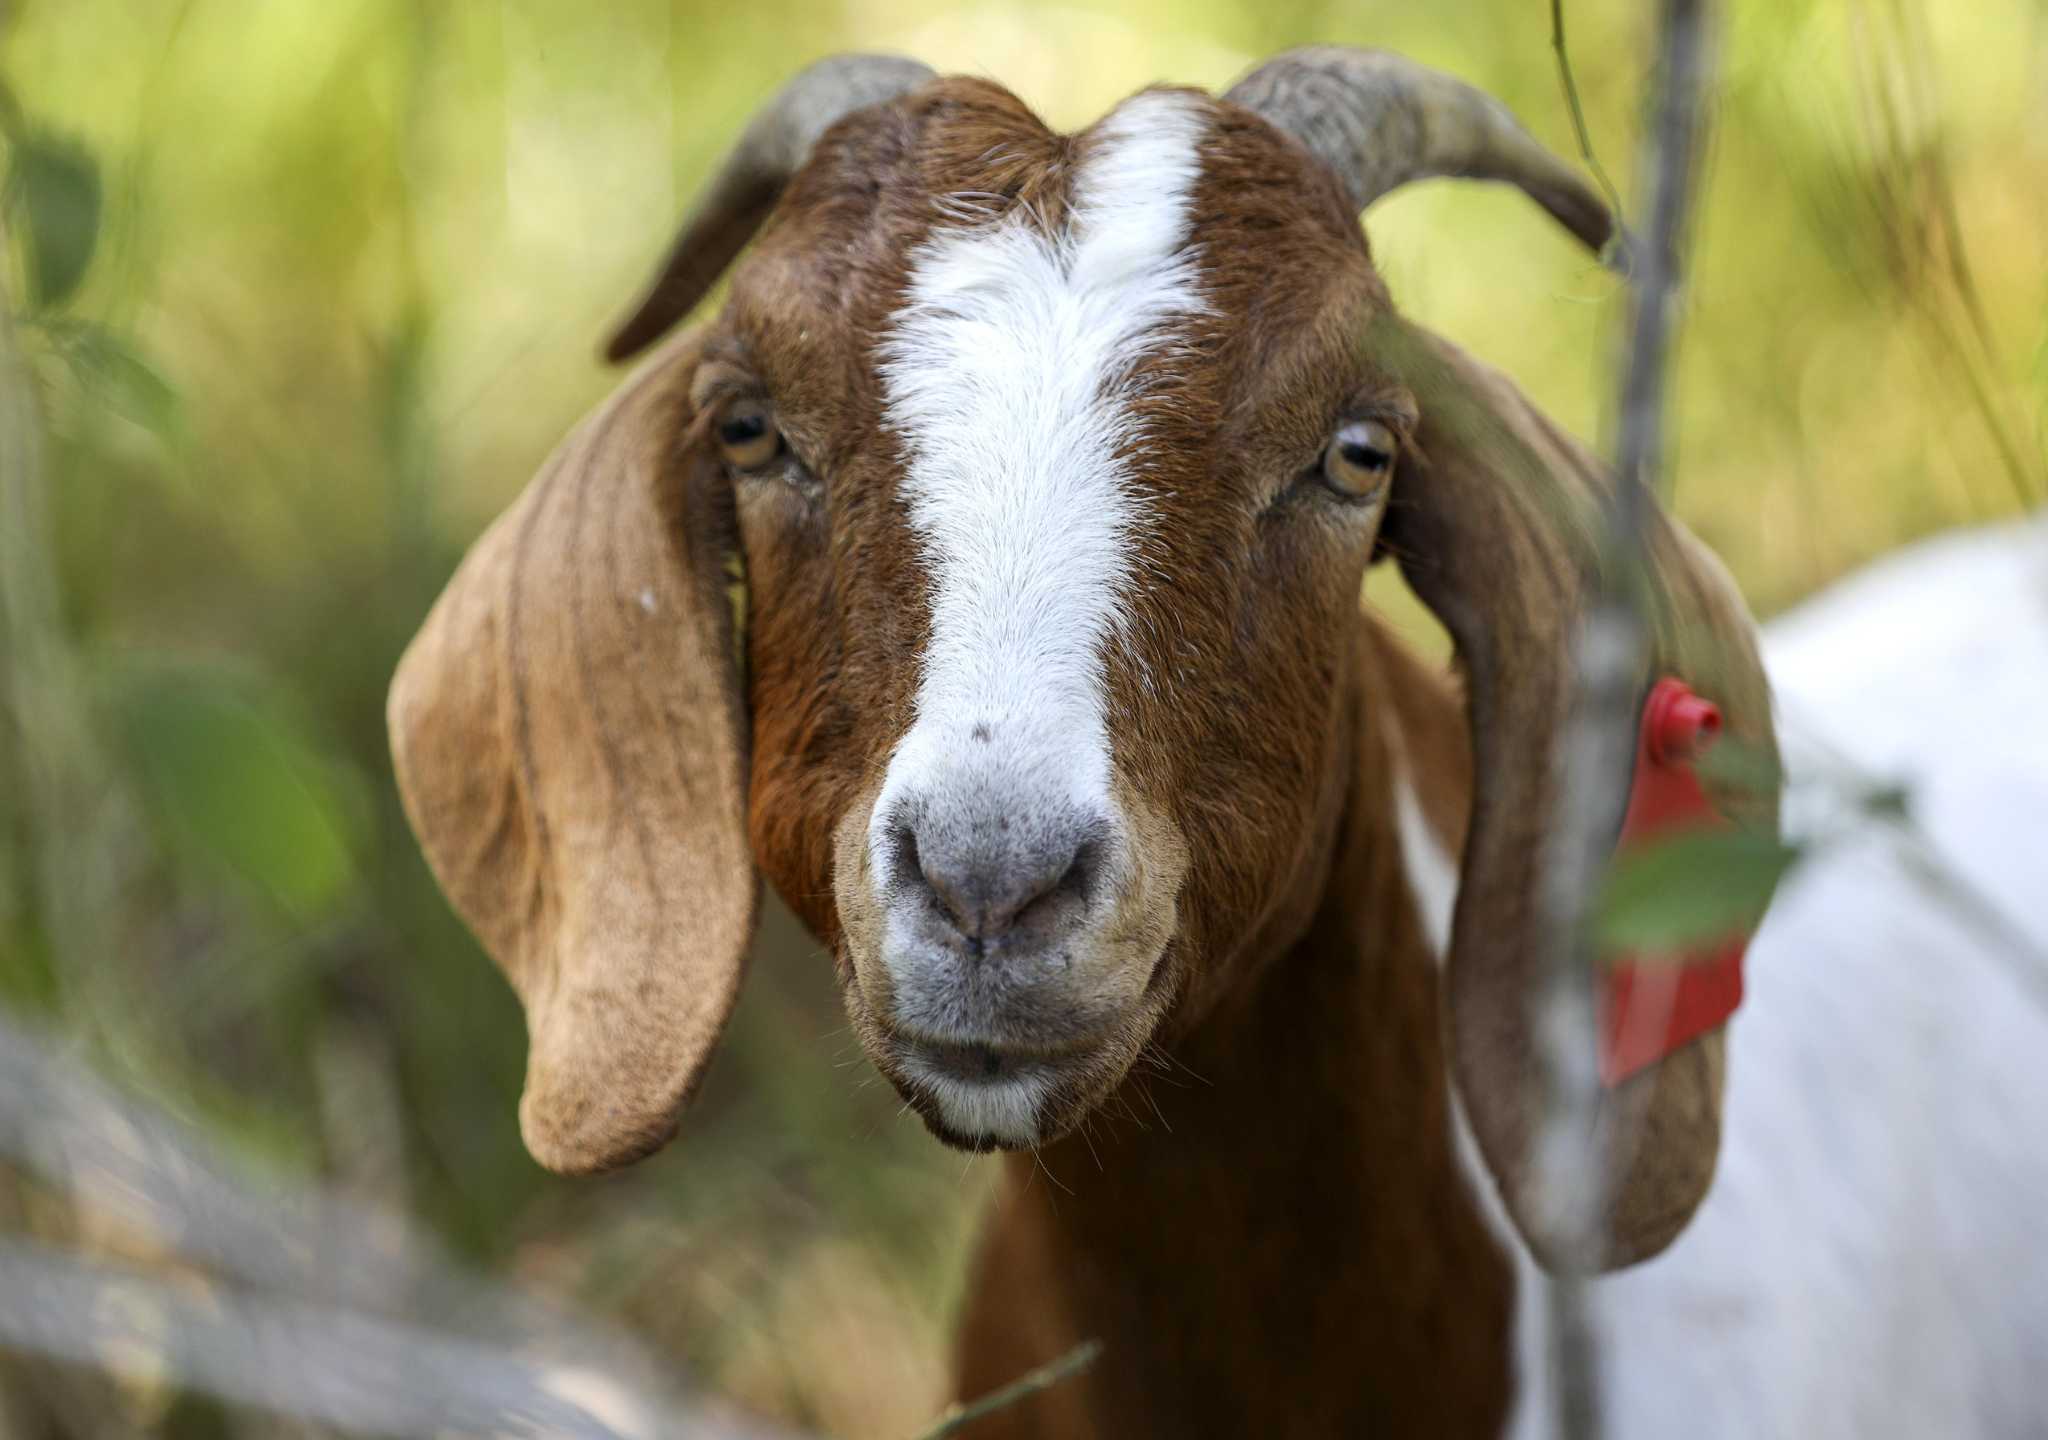 Rent-a-goats will return to the Houston Arboretum to help 'mow' the grasslands